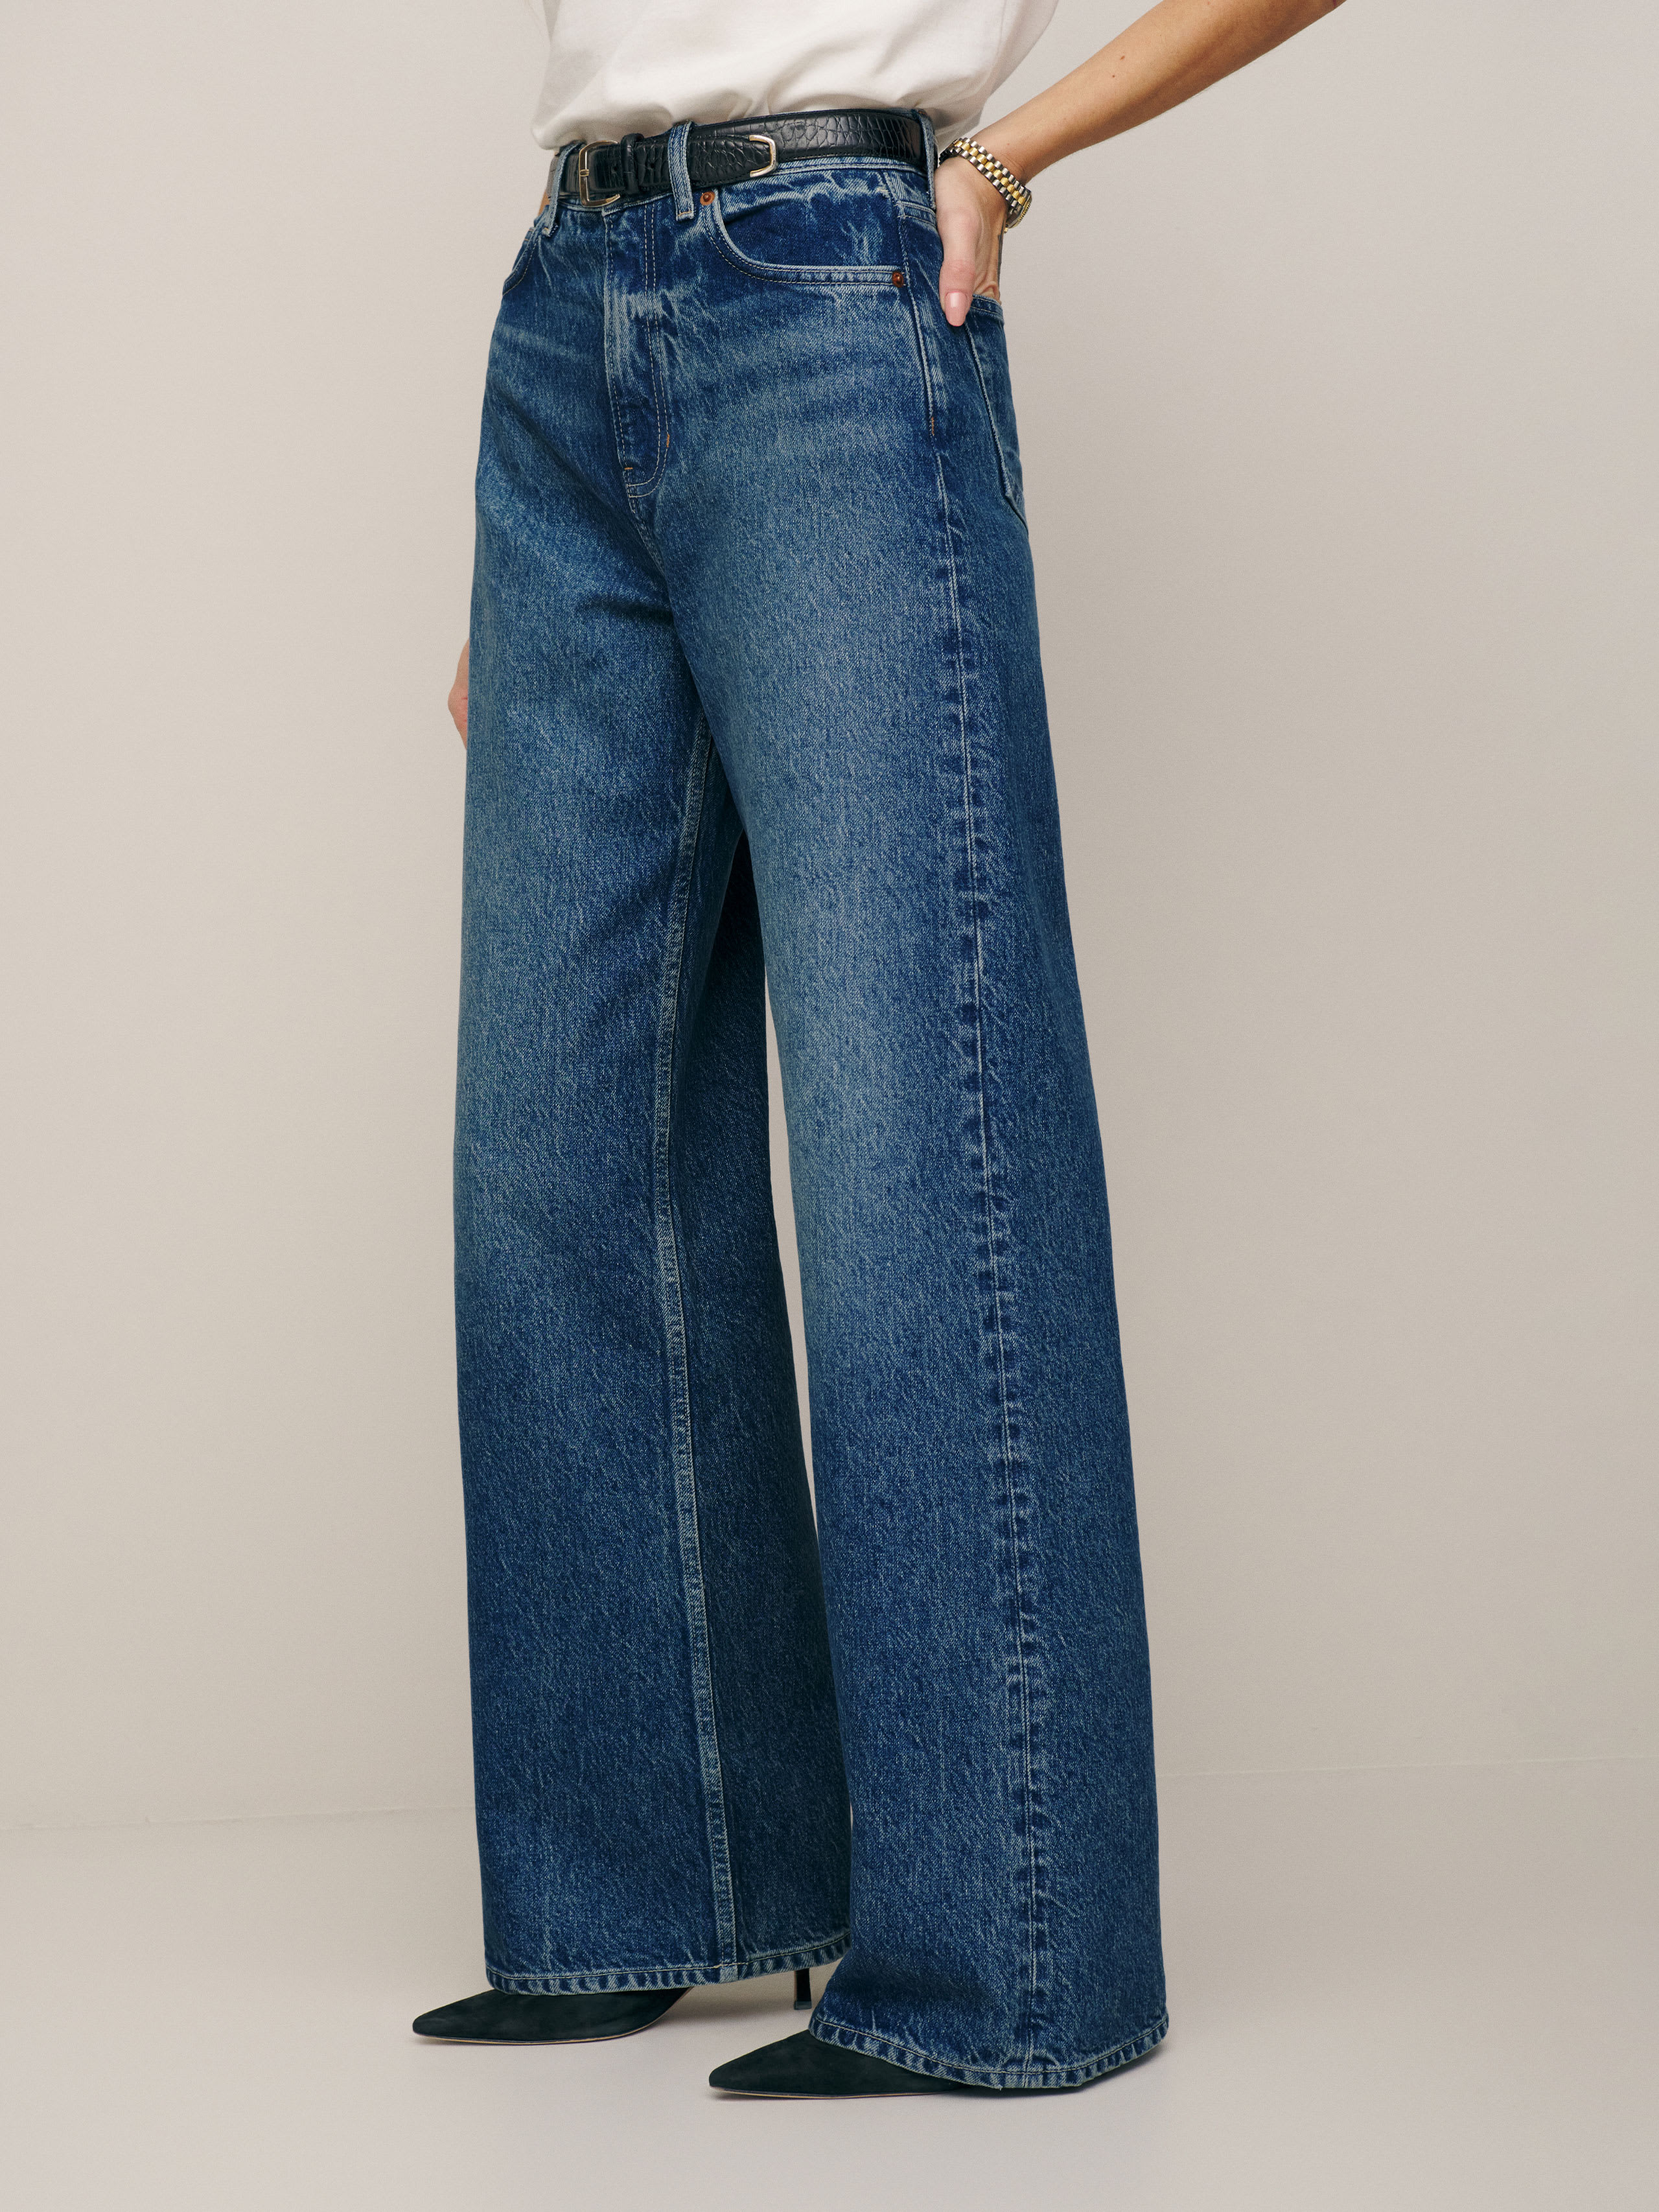 Reformation Cary High Rise Slouchy Wide Leg Jeans In Lanier